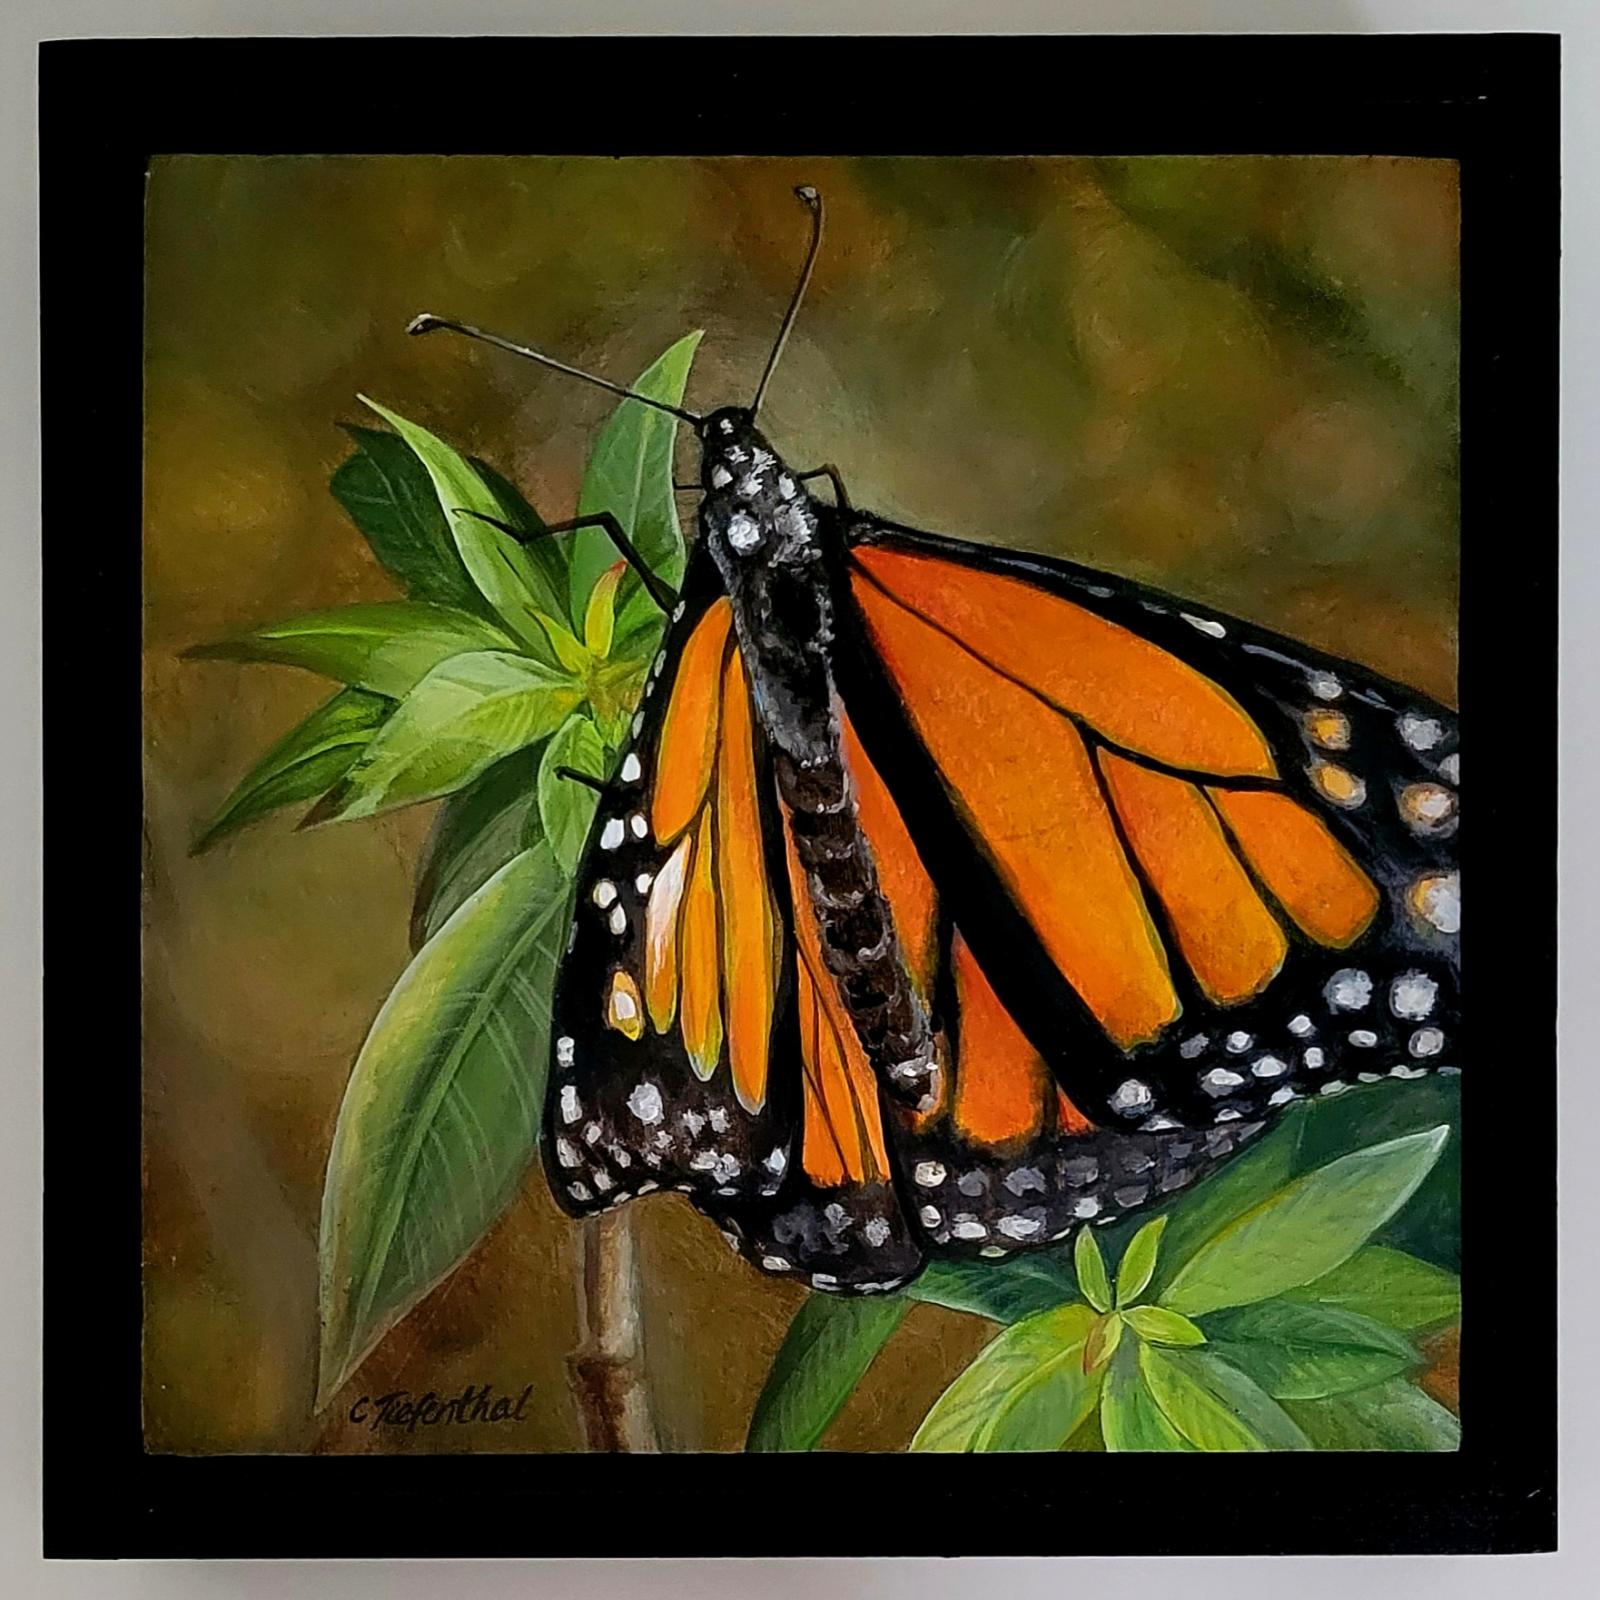 Acrylic on canvas of a monarch butterfly on foliage.